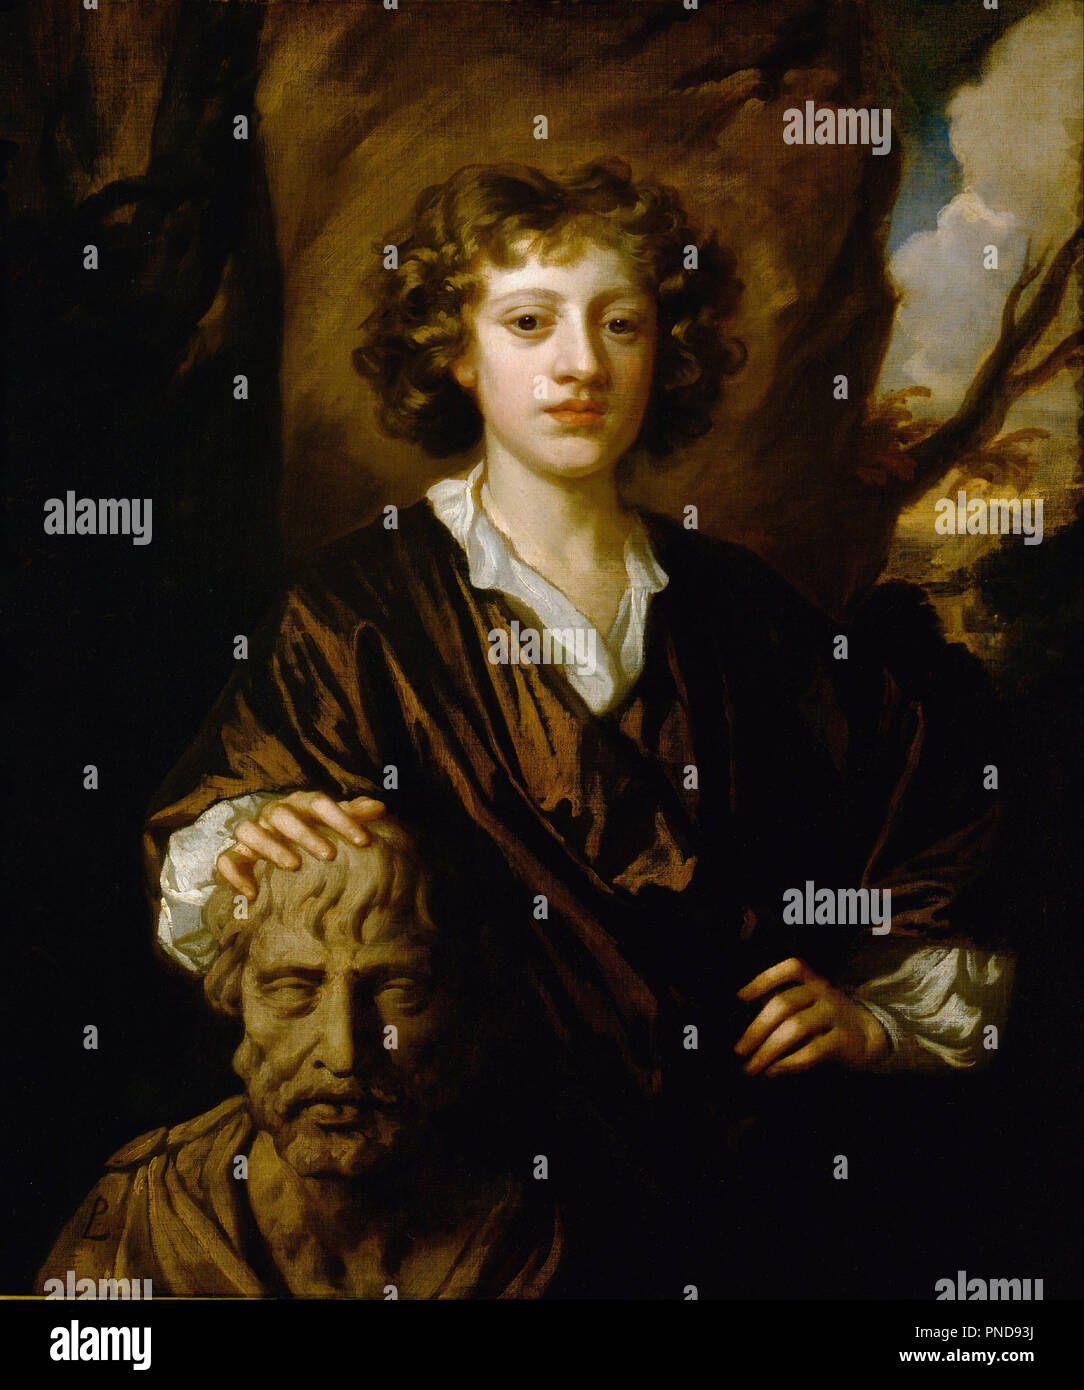 Bartholomew Beale. Date/Period: Ca. 1670. Painting. Oil on canvas Oil. Height: 915 mm (36.02 in); Width: 762 mm (30 in). Author: LELY, PETER. Peter Lely. Stock Photo